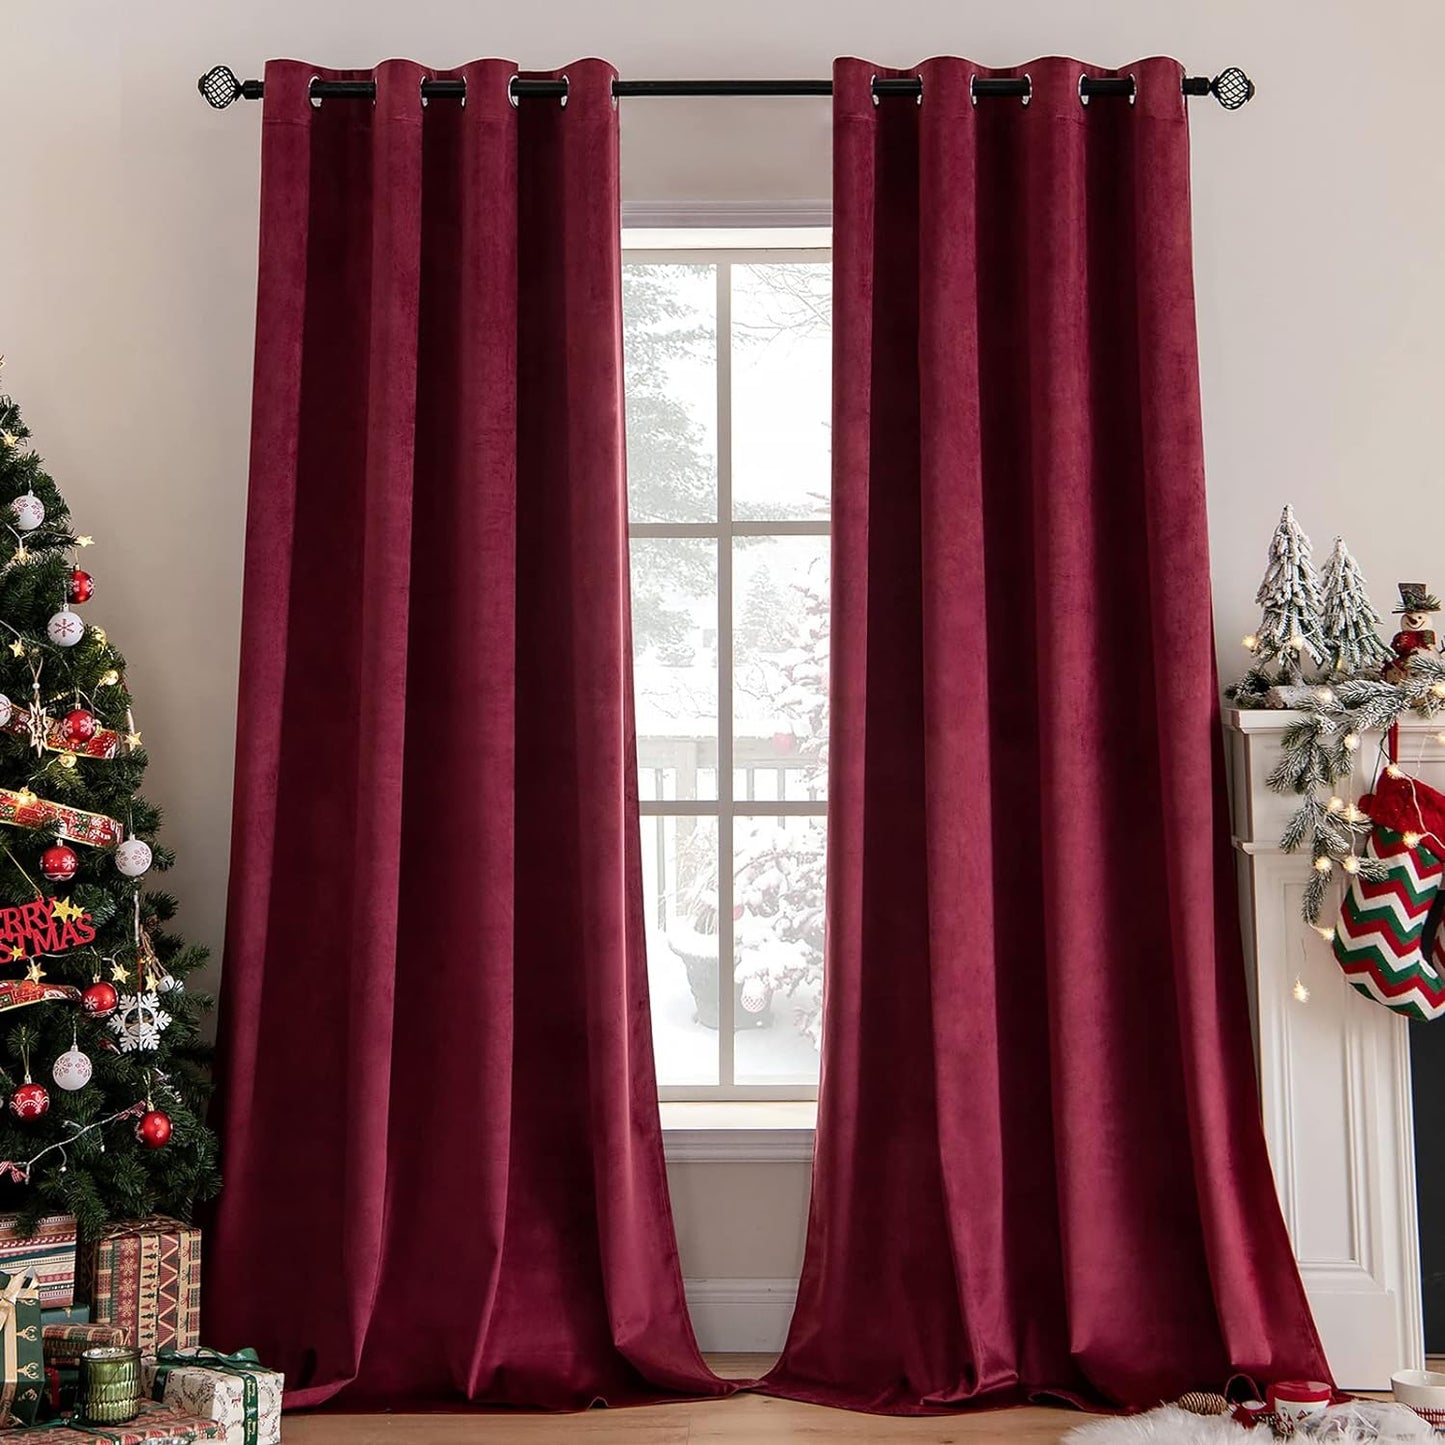 MIULEE Velvet Curtains Olive Green Elegant Grommet Curtains Thermal Insulated Soundproof Room Darkening Curtains/Drapes for Classical Living Room Bedroom Decor 52 X 84 Inch Set of 2  MIULEE Burgundy W52 X L96 